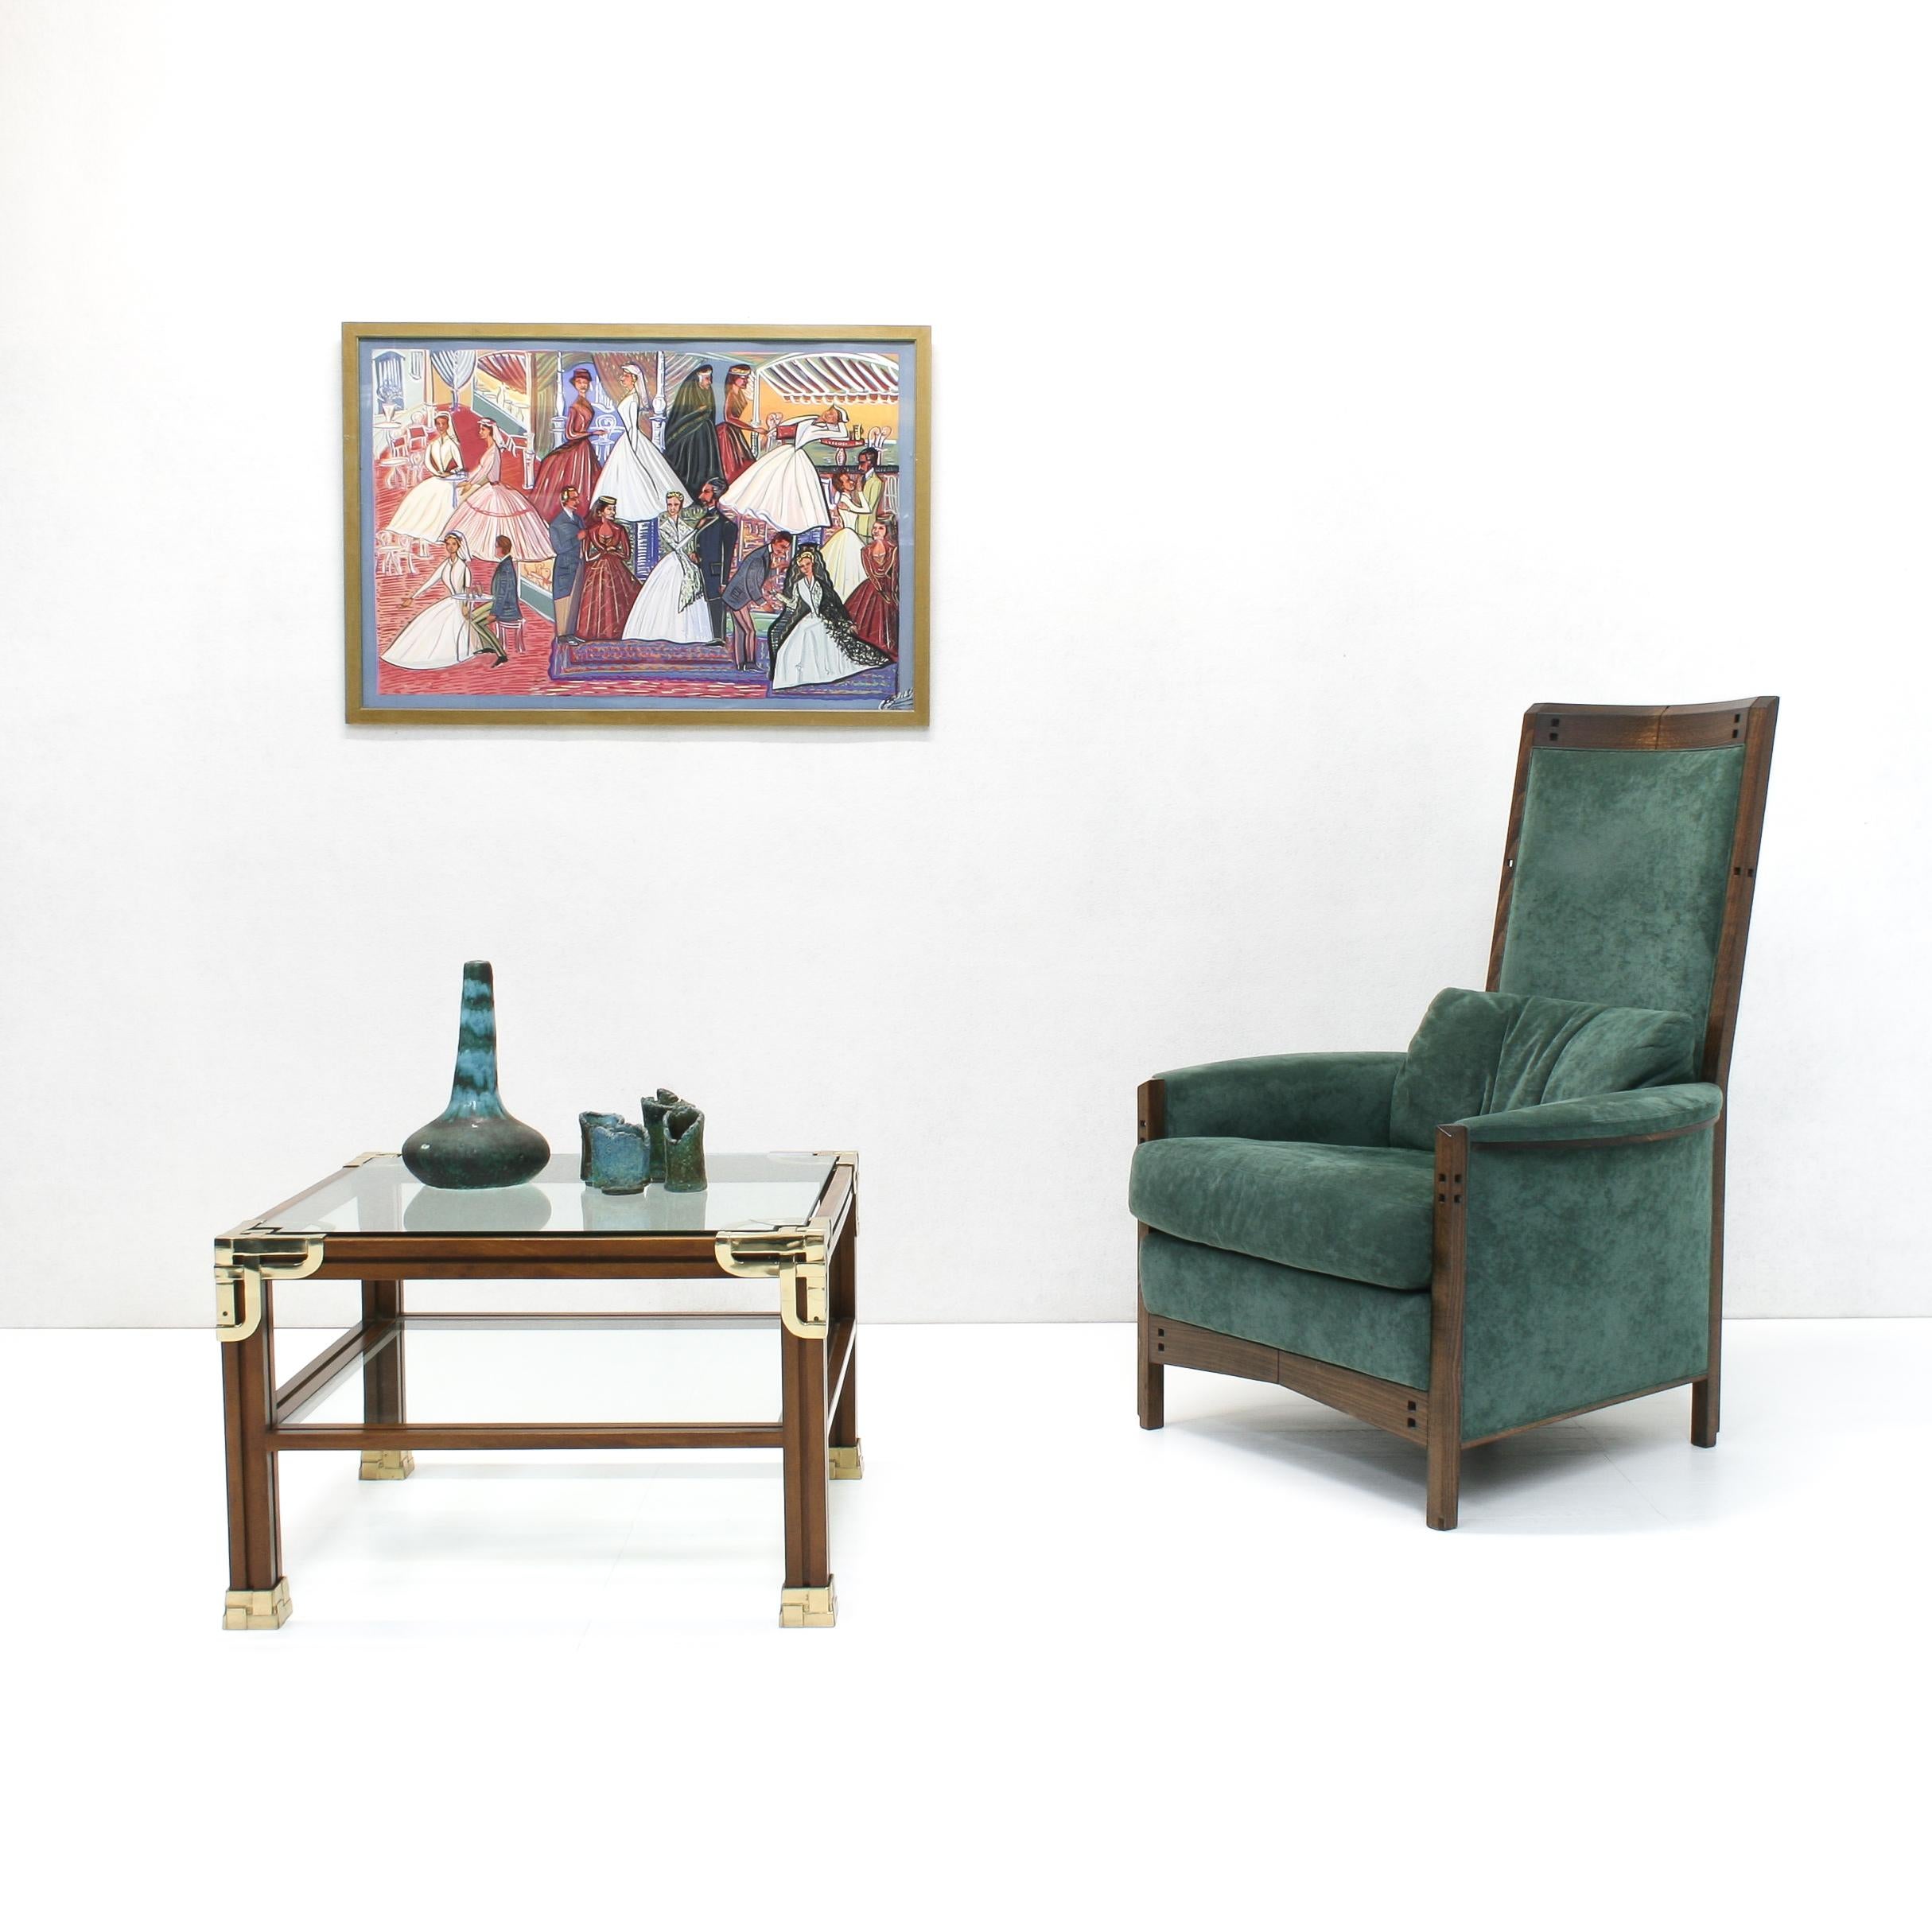 This stylish highback Peggy armchairs, from the Galaxy series, was designed by Umberto Asnago for the renowned Italian furniture maker Giorgetti.

Exquisite Art-Deco style see-through carving details in the walnut frame and upholstered in a moss